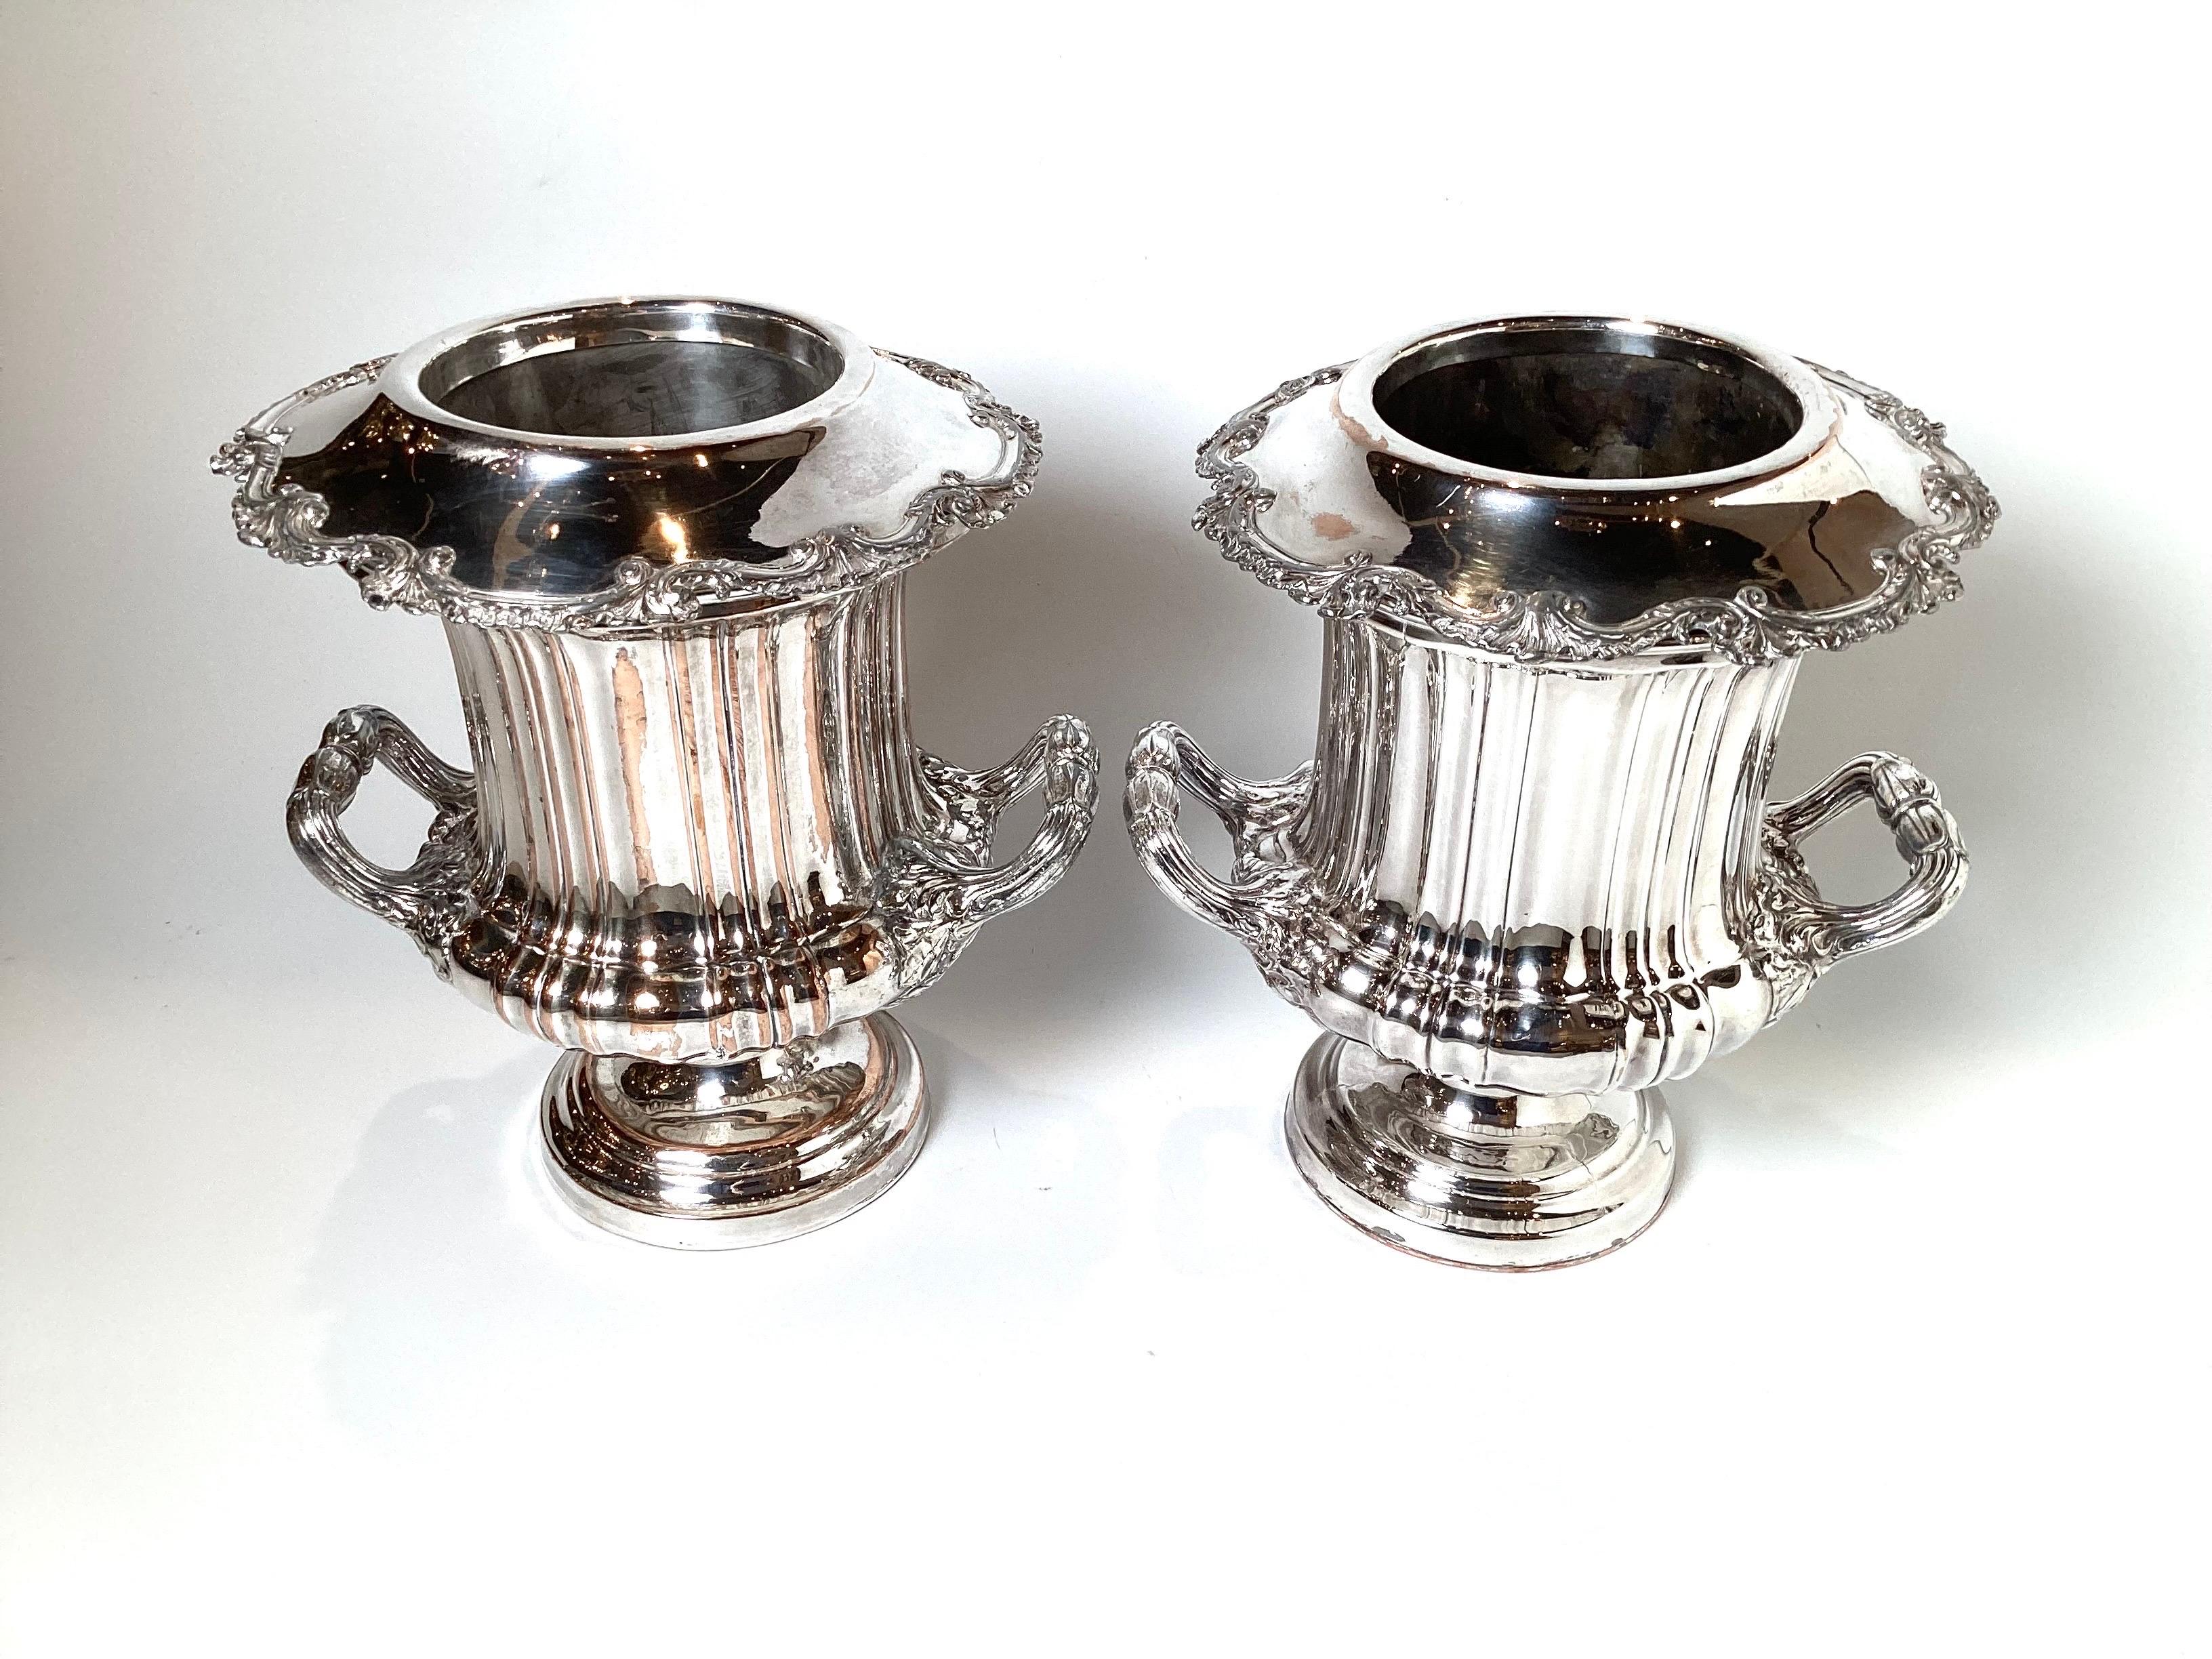 A fine pair of silver plate on copper Champagne coolers. The Campana urn form with liners, each in three parts. There is copper bleed through the silver plate, but still very useful and elegant.